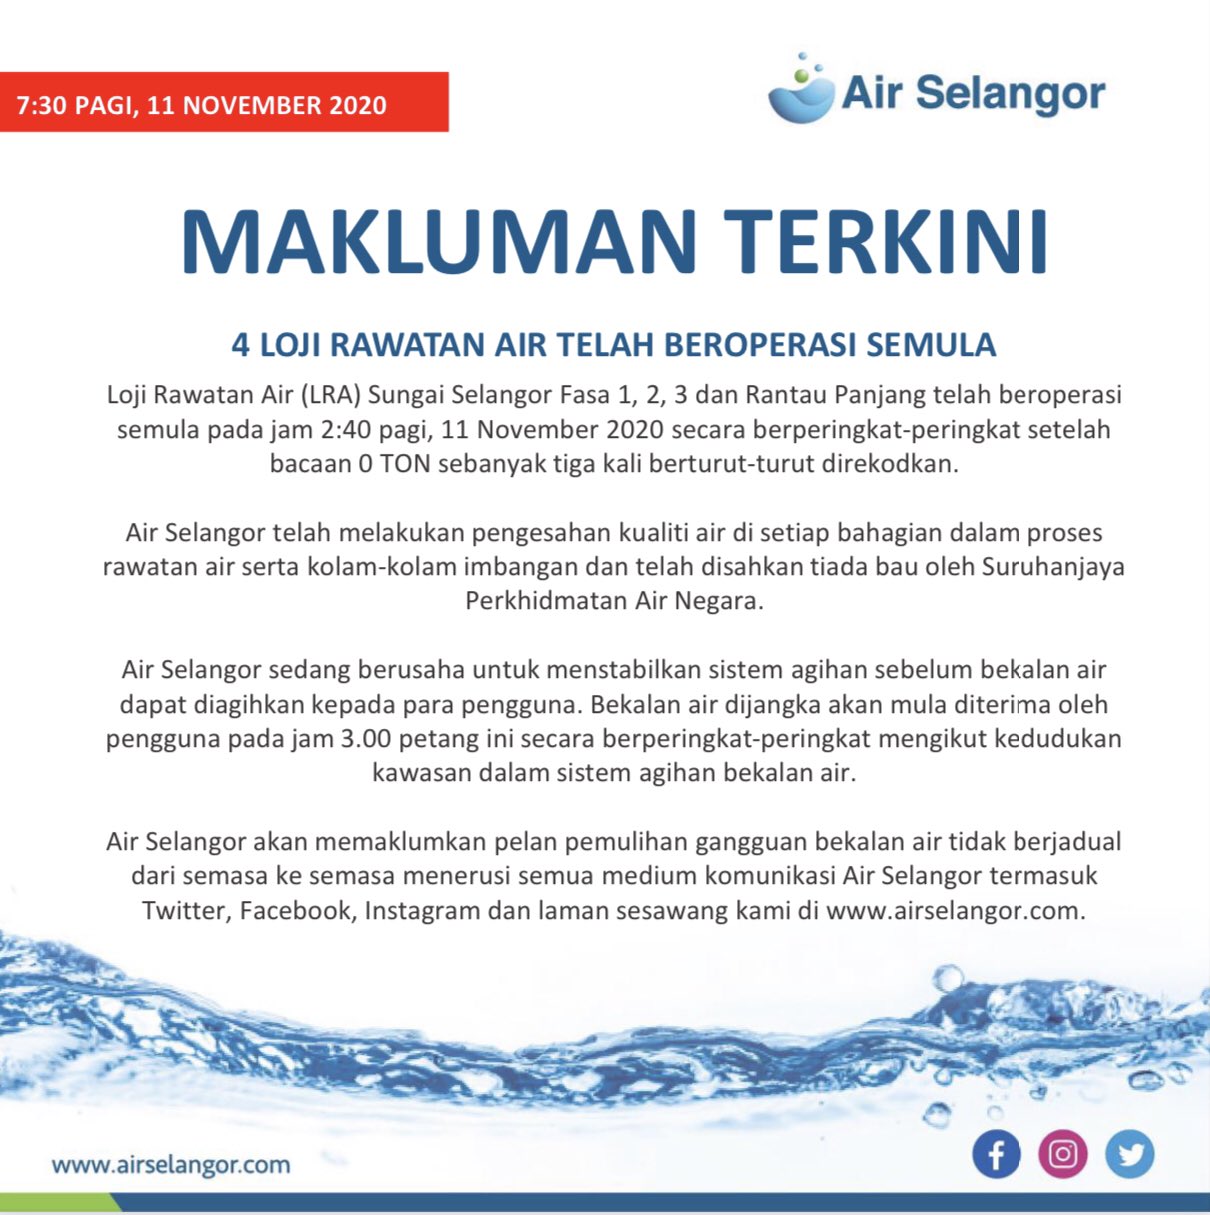 Bfm News On Twitter Water Supply In 1 279 Areas In The Klang Valley Will Be Restored In Stages Starting 3pm Today Air Selangor Says Four Water Treatment Plants In Selangor Have Resumed